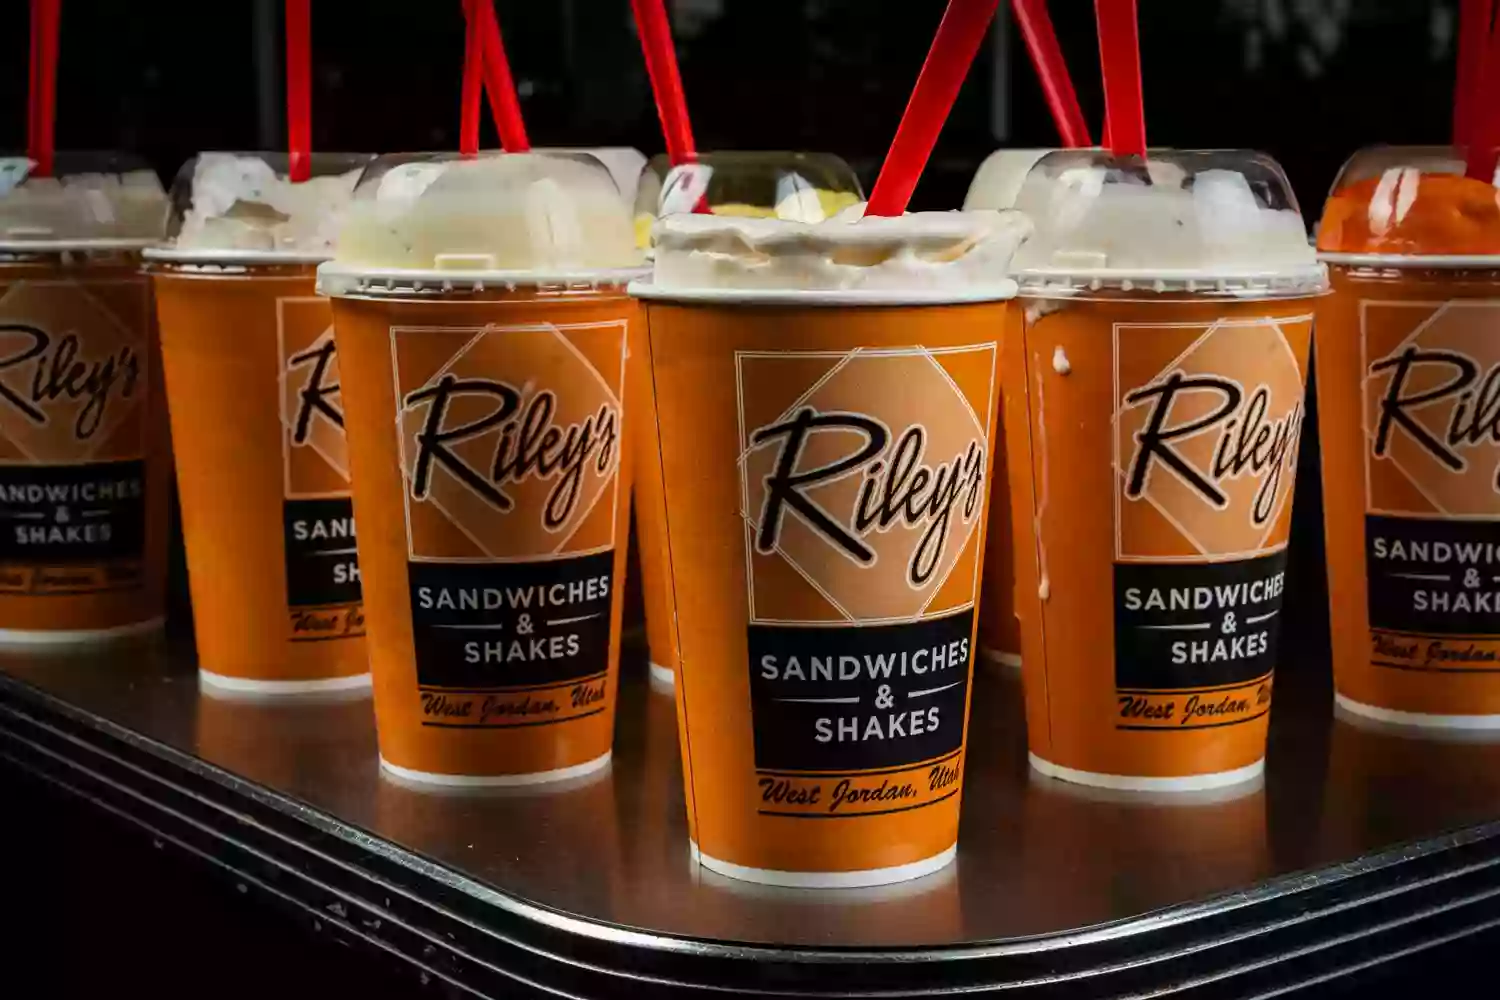 Riley's Sandwiches & Shakes